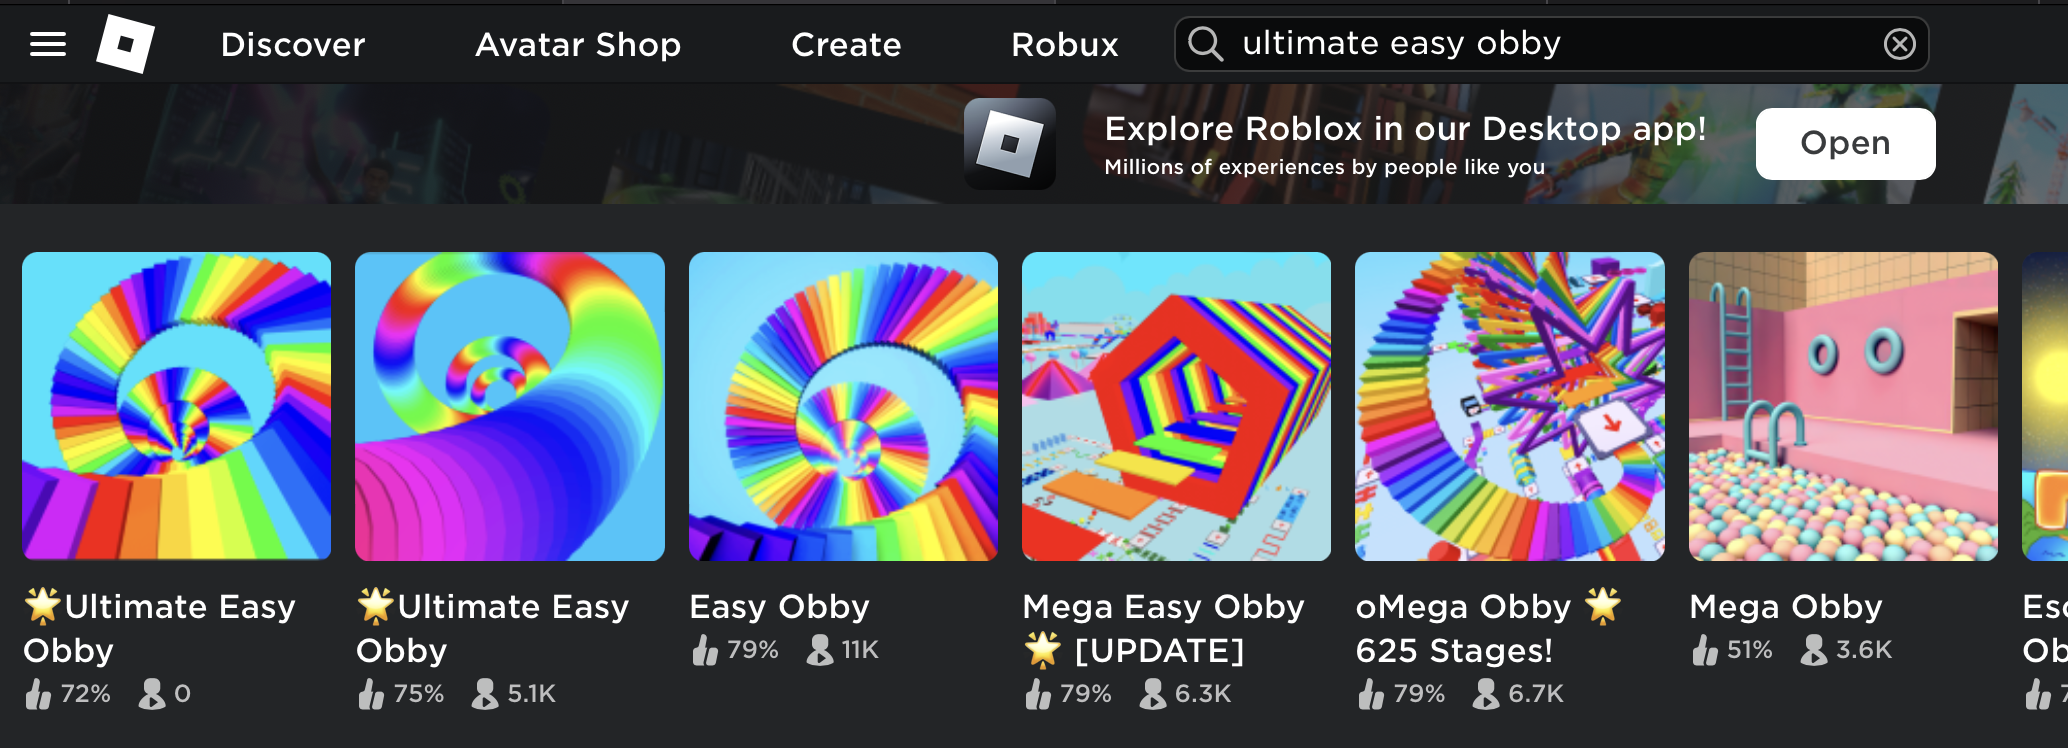 How to Make a Game on Roblox, Very Easy!